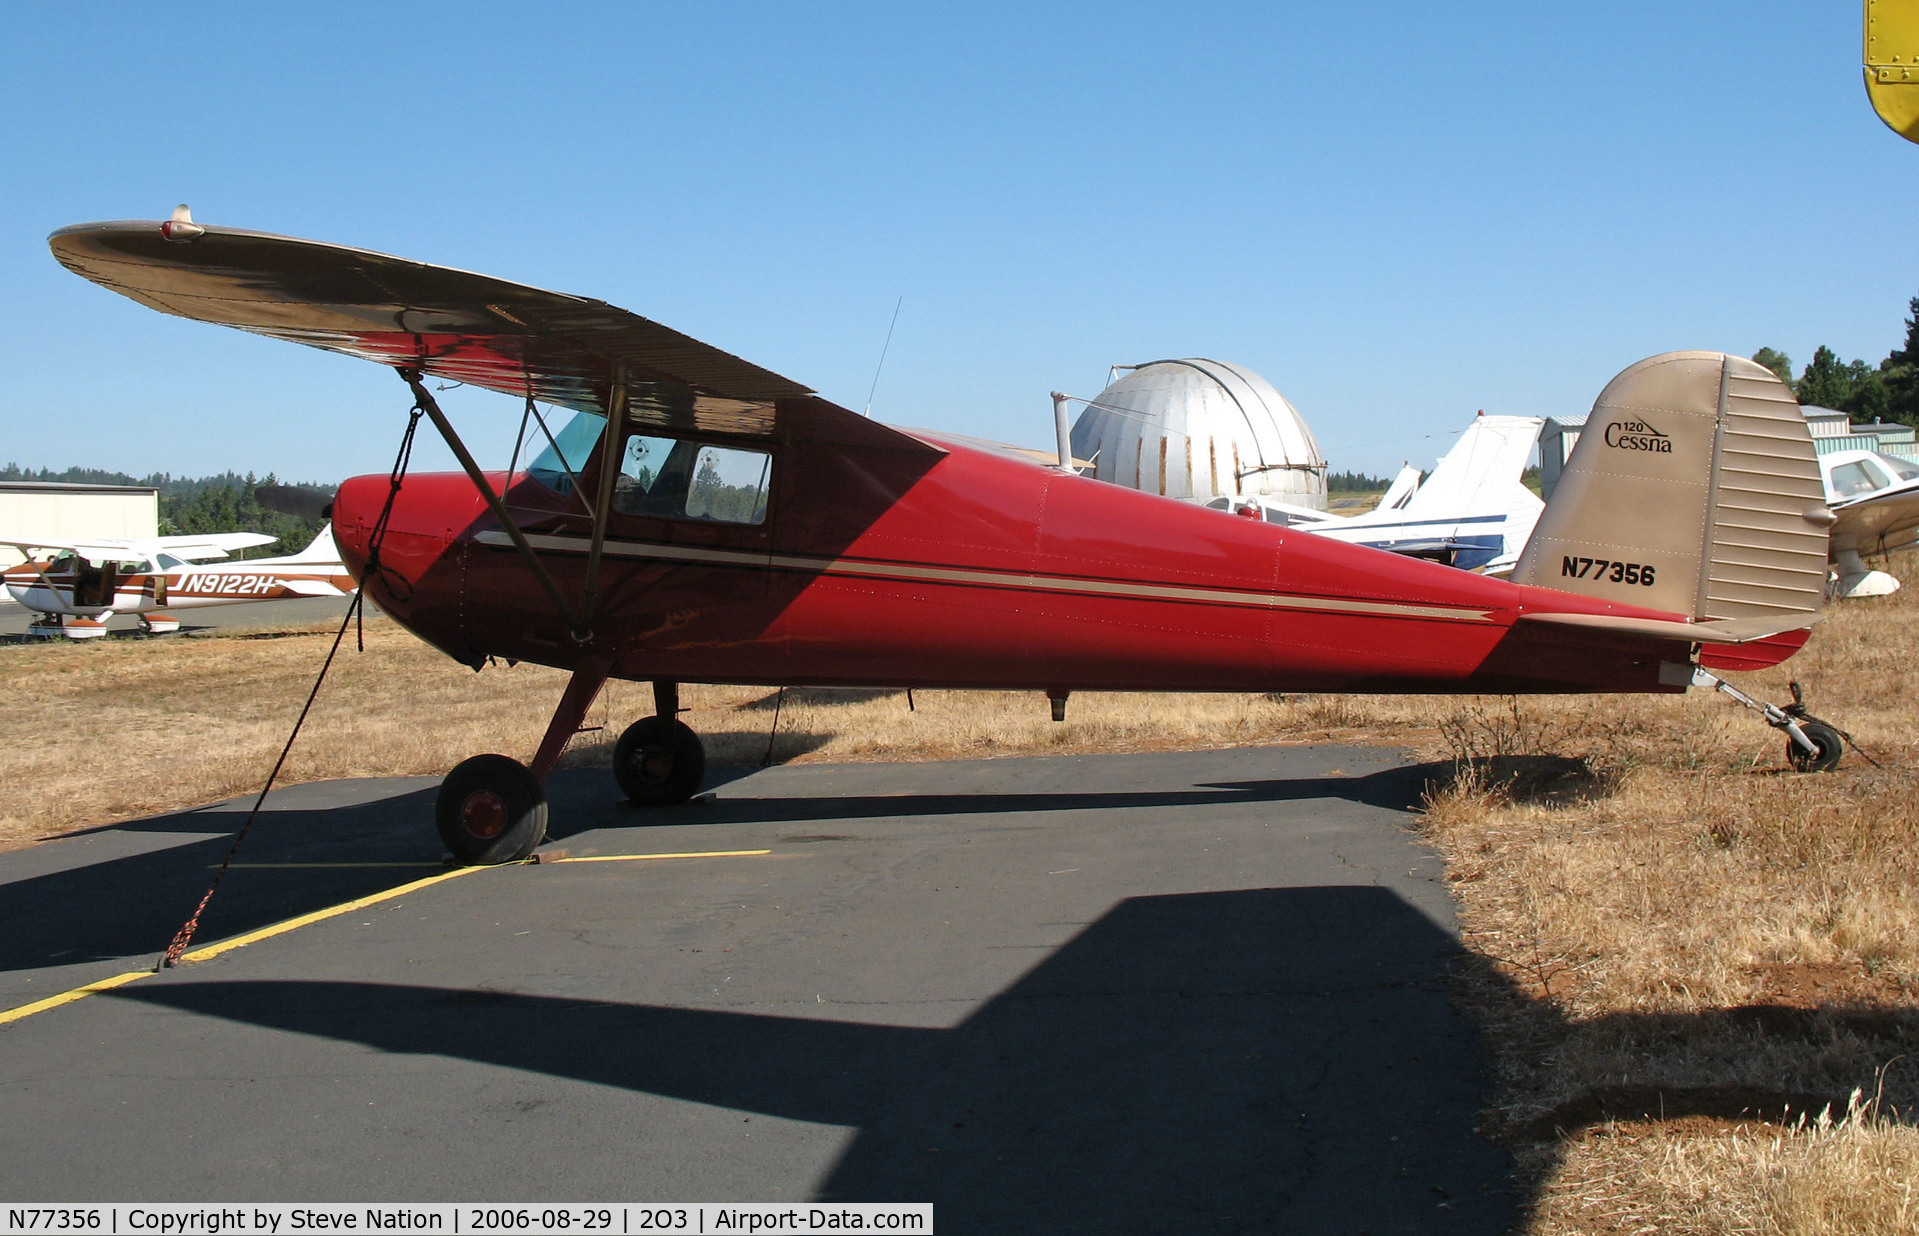 N77356, 1946 Cessna 120 C/N 11797, Locally-based 1946 Cessna 120 @ Parrett Field, Angwin, CA